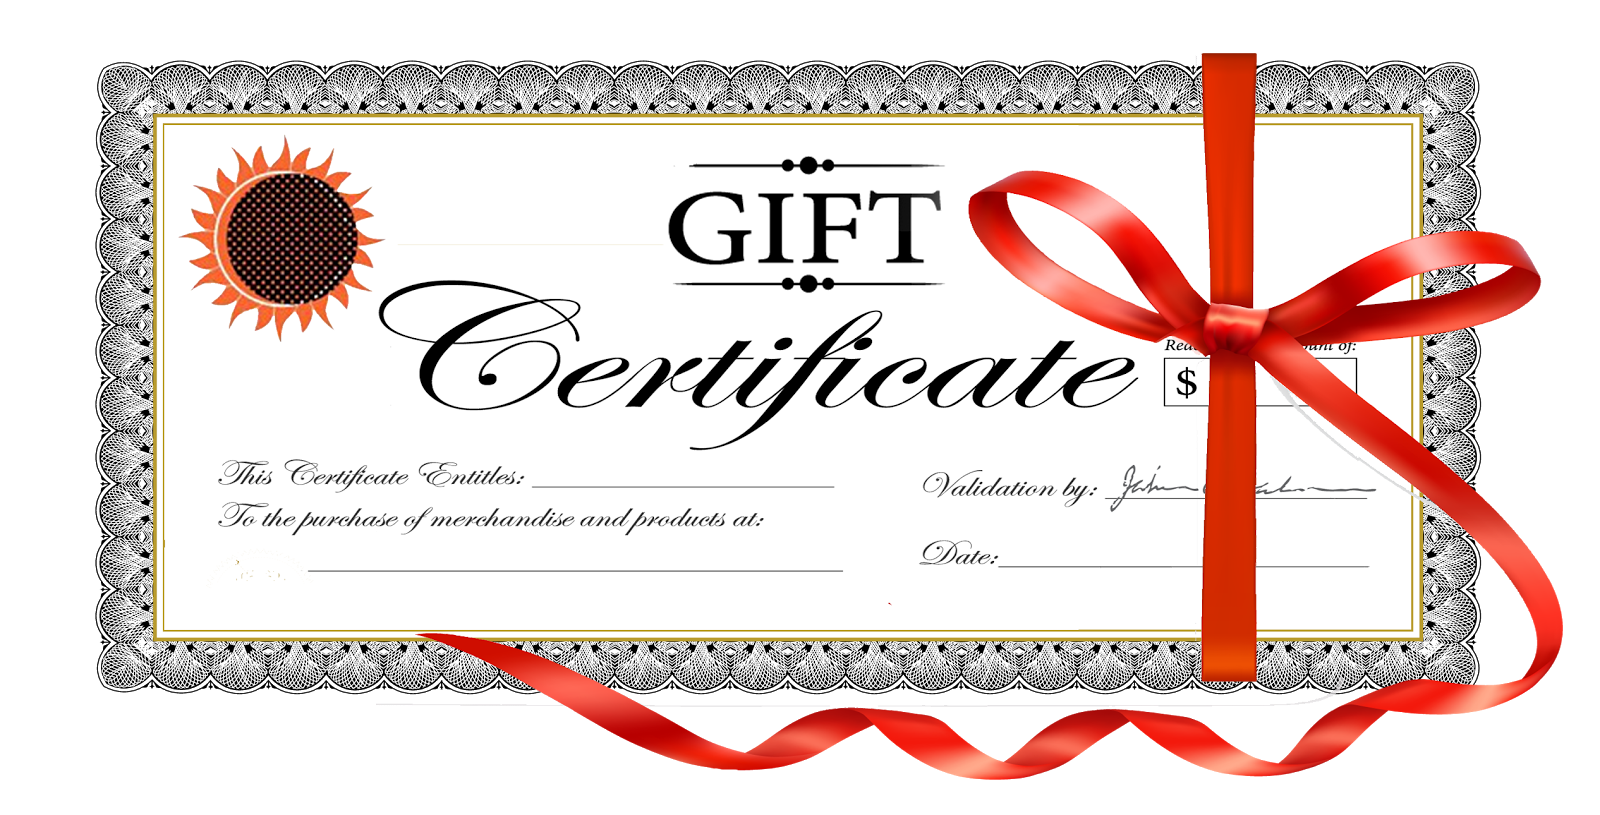 Gifts templates acur lunamedia. Congratulations clipart certificate